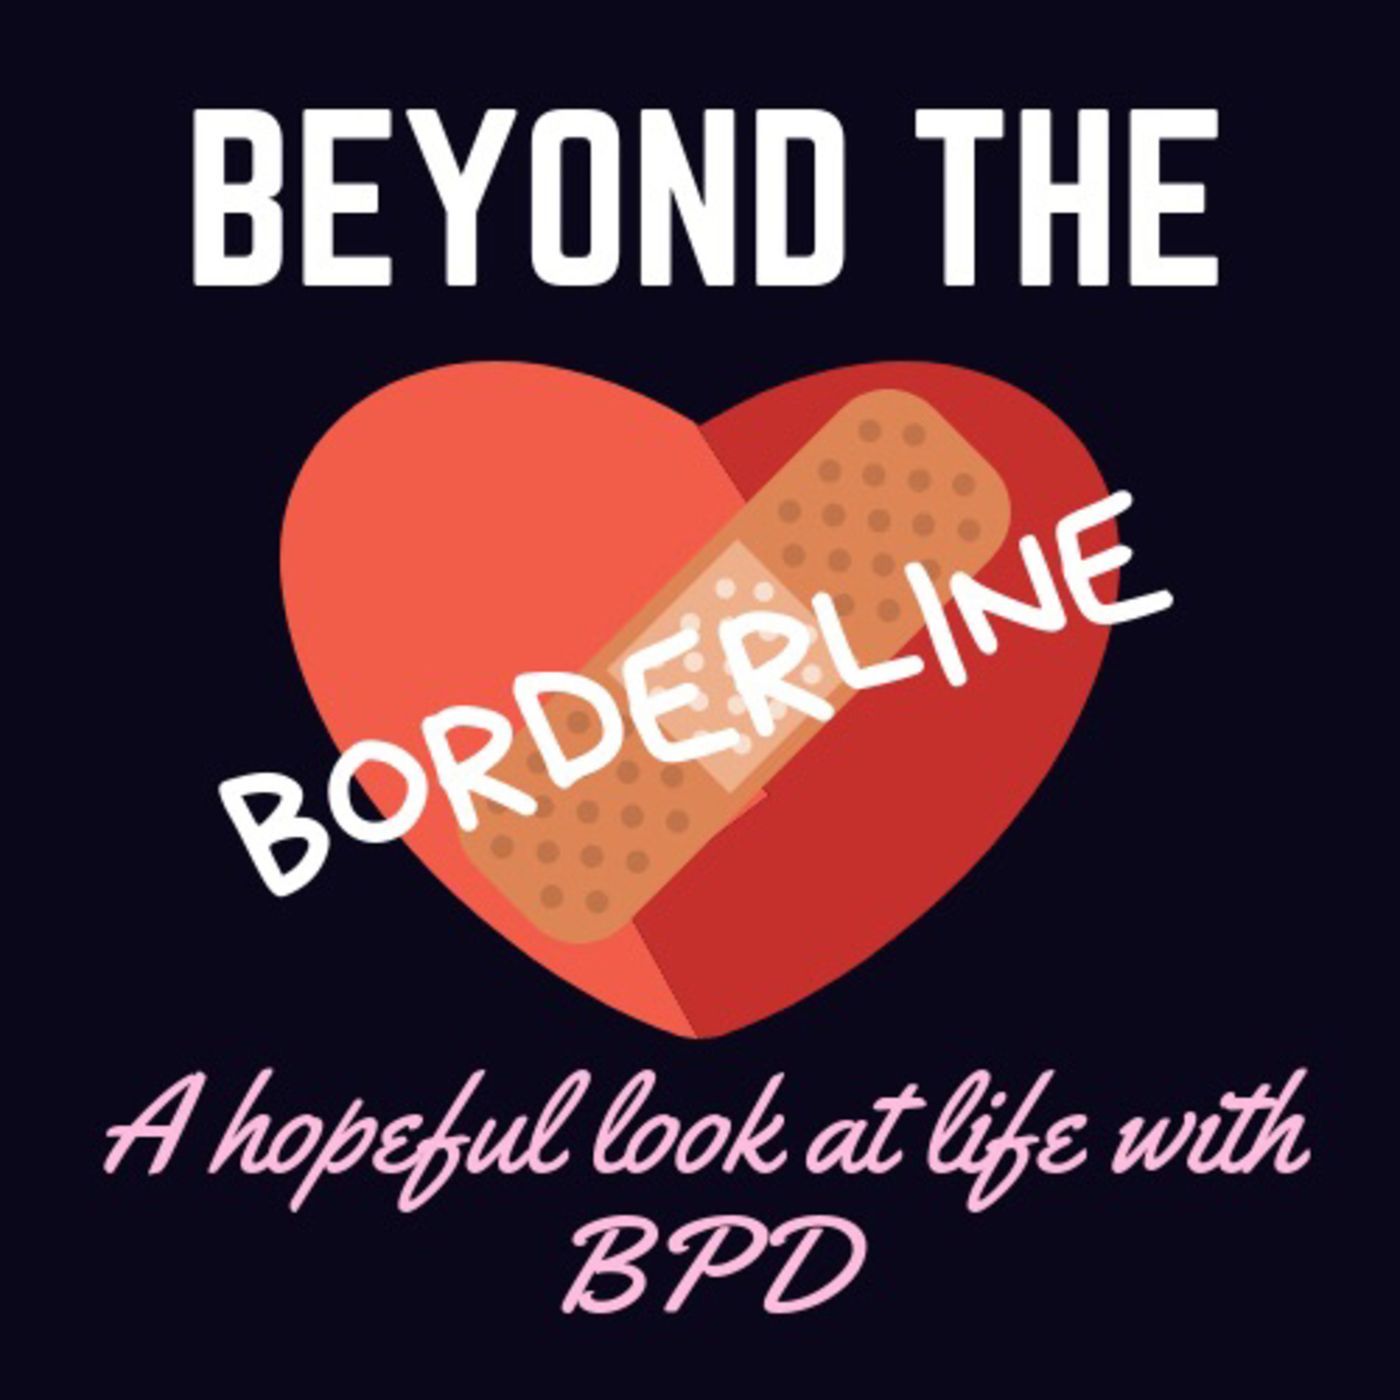 Beyond the Borderline - An interview with suicide:abuse survivor, Prison frontman and Cope Notes founder, Johnny Crowder